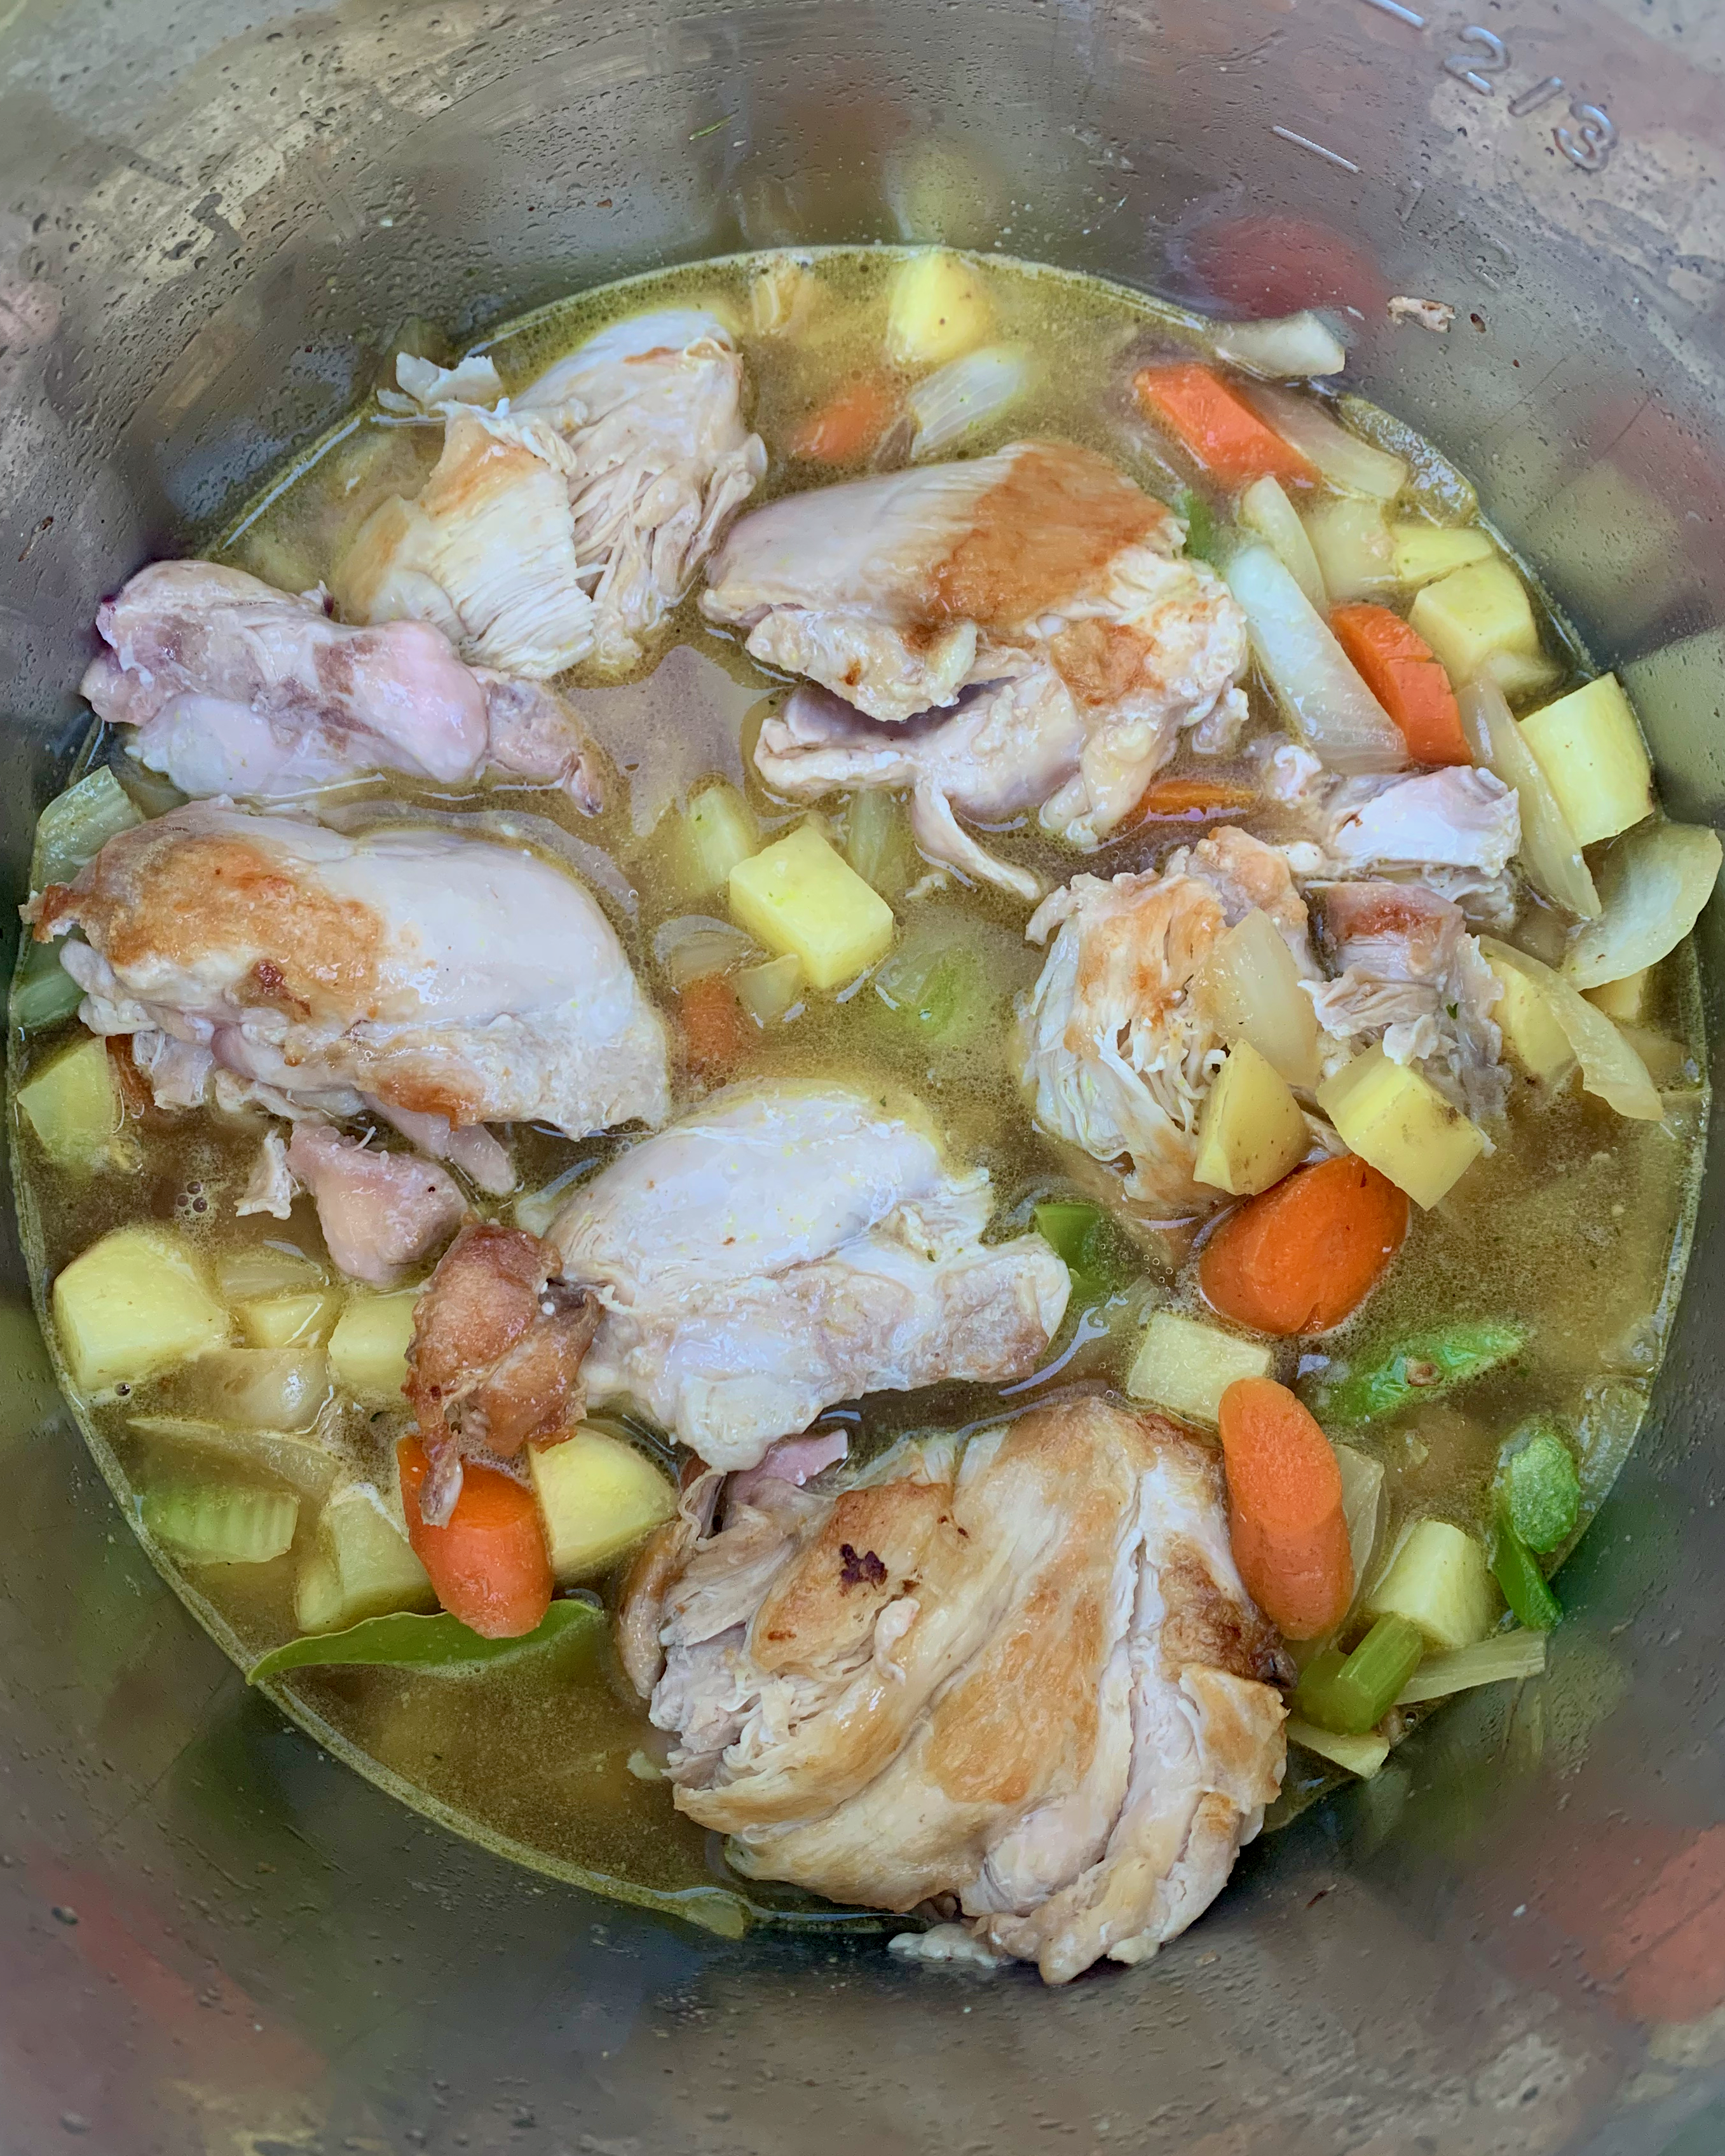 chicken stew ingredients in the Instant Pot, ready to pressure cook.